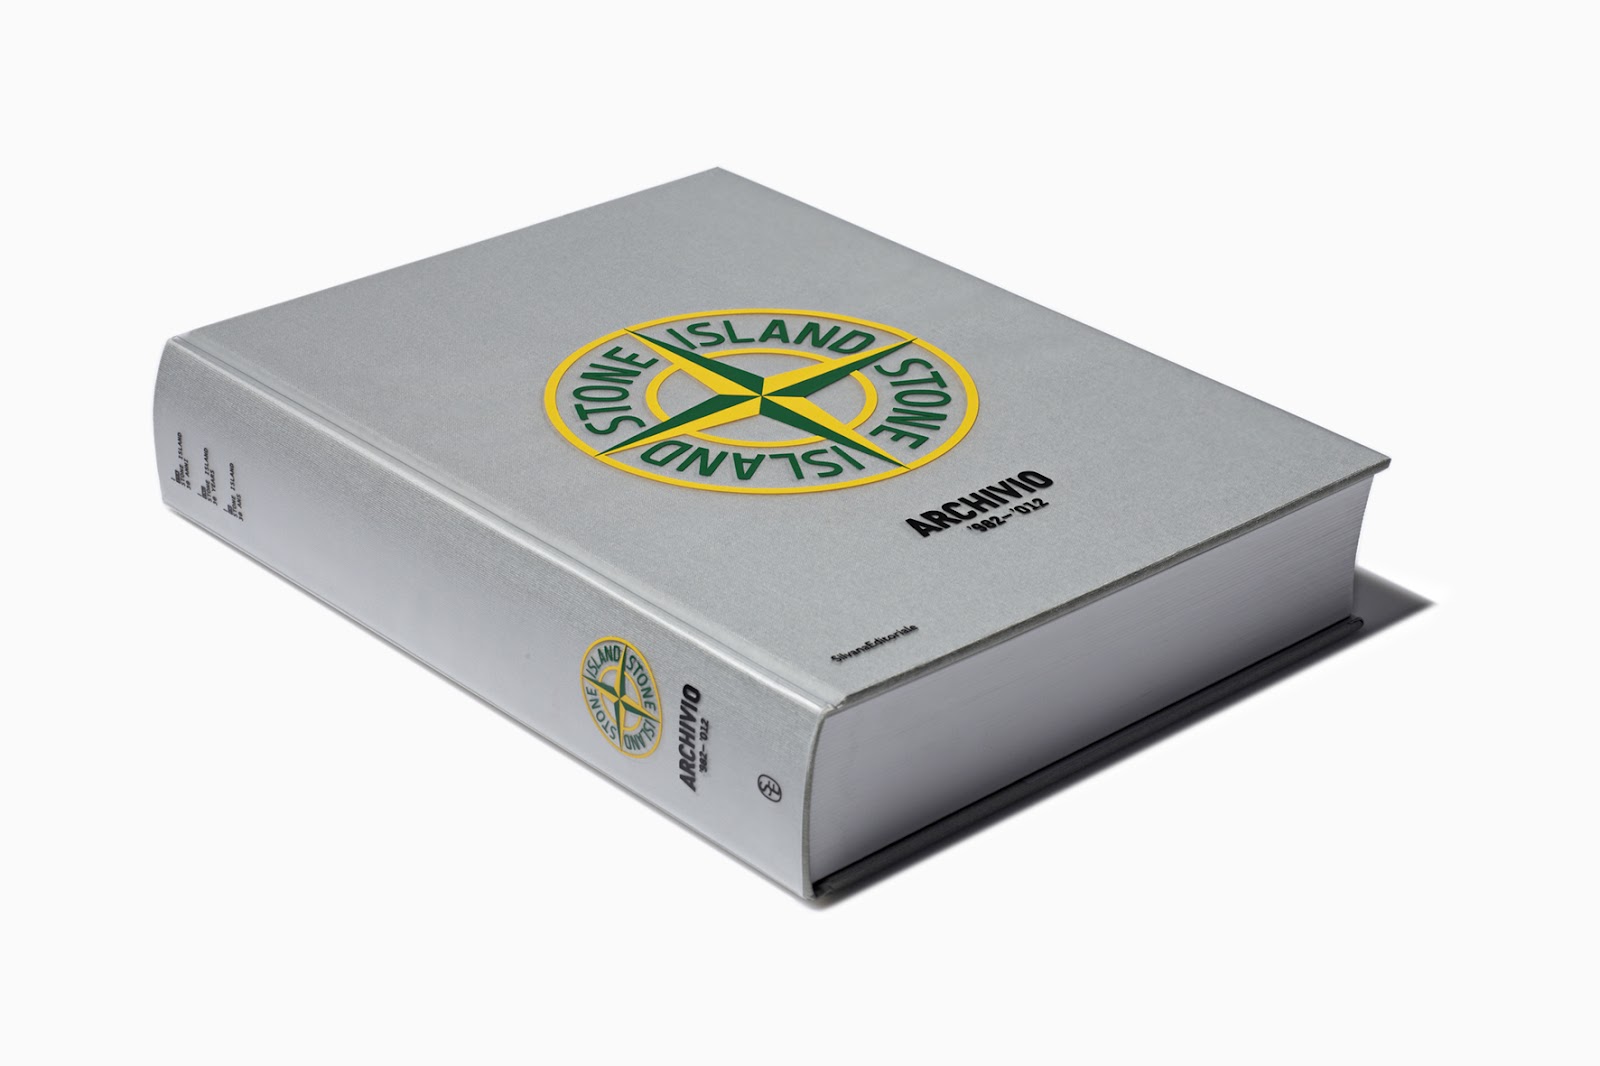 Things Is Cool Stone Island Archivio 982 012 The Book